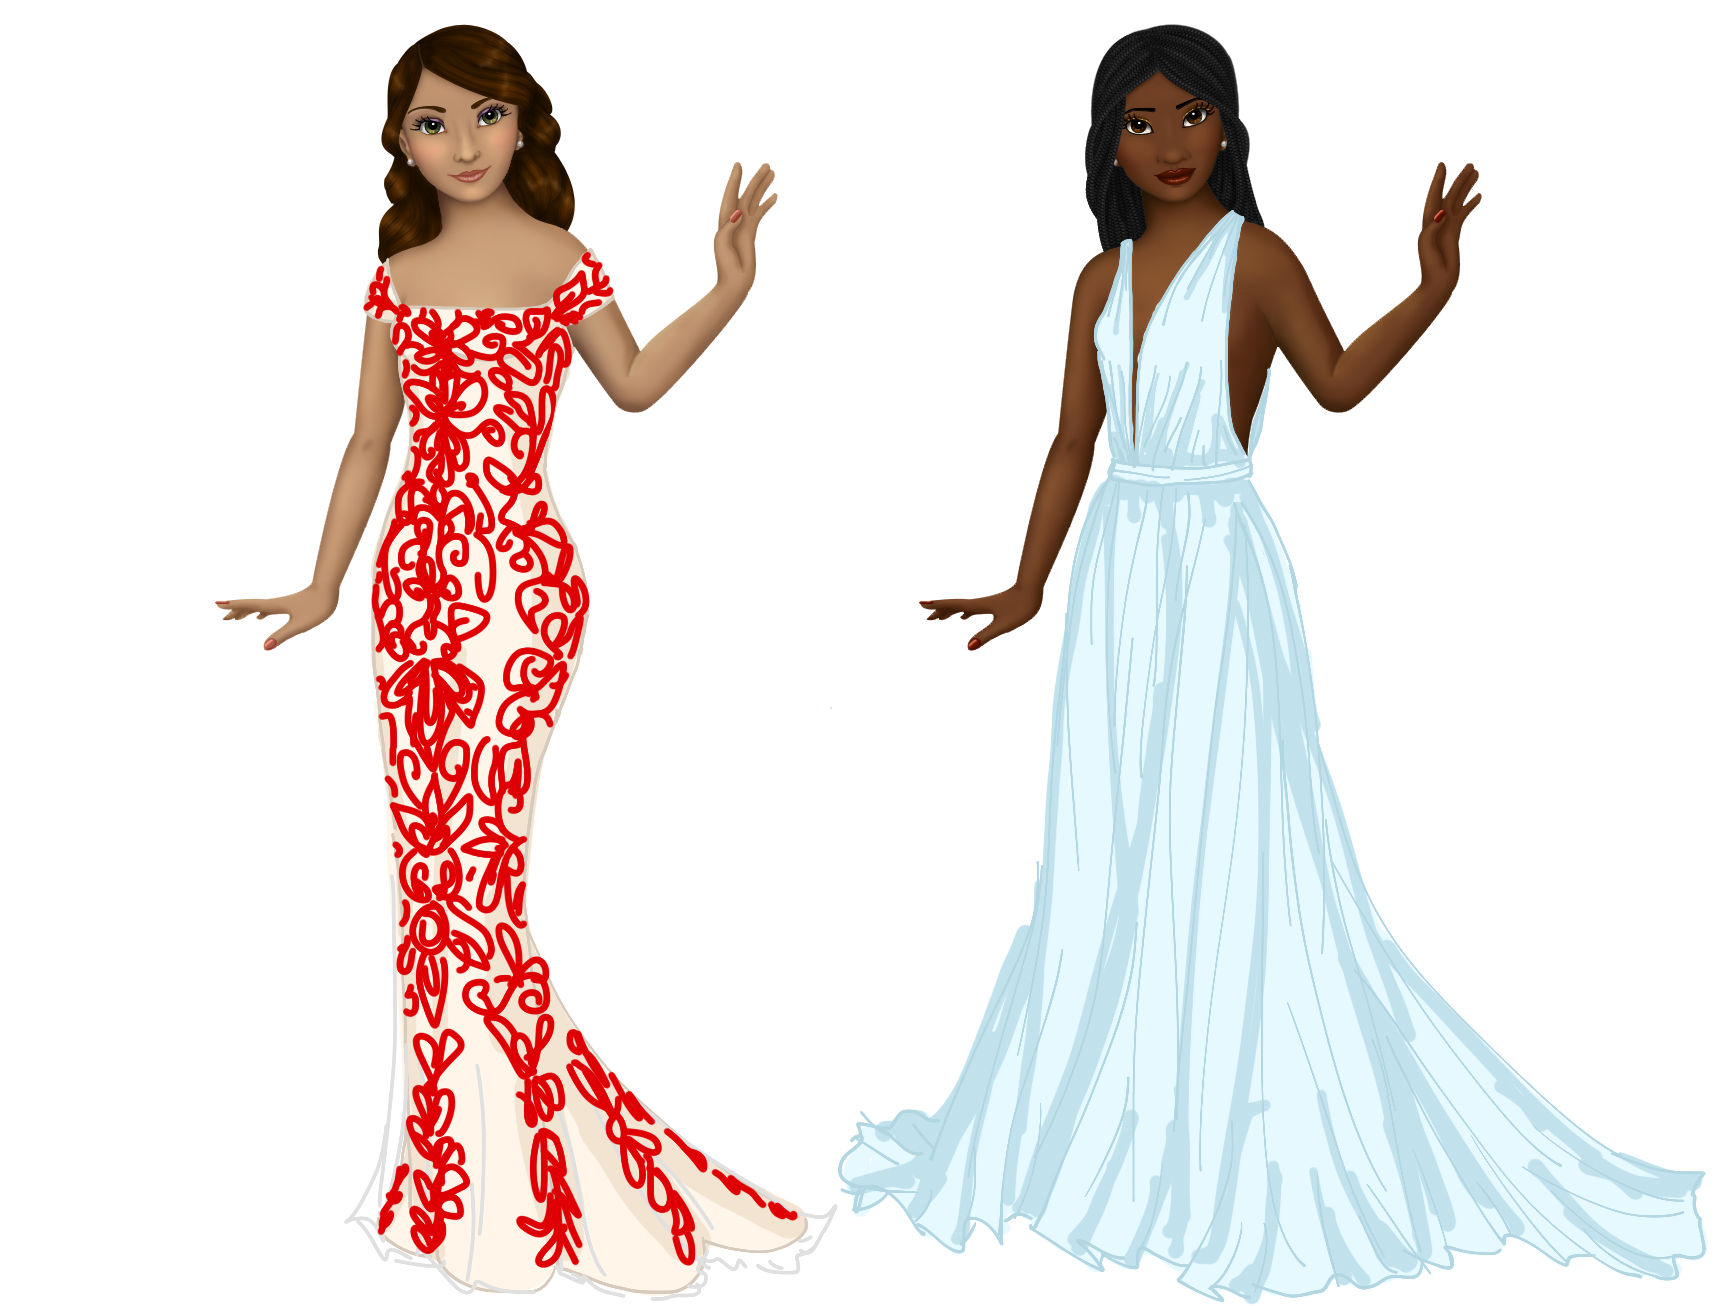 Mia and Leyla in Bette Midler and Lupita Nyong'o's Oscar gowns. Bette's is a cream mermaid dress with thick red lace, and Lupita's is a light blue gown with a low V neck and a full skirt, classically draped.